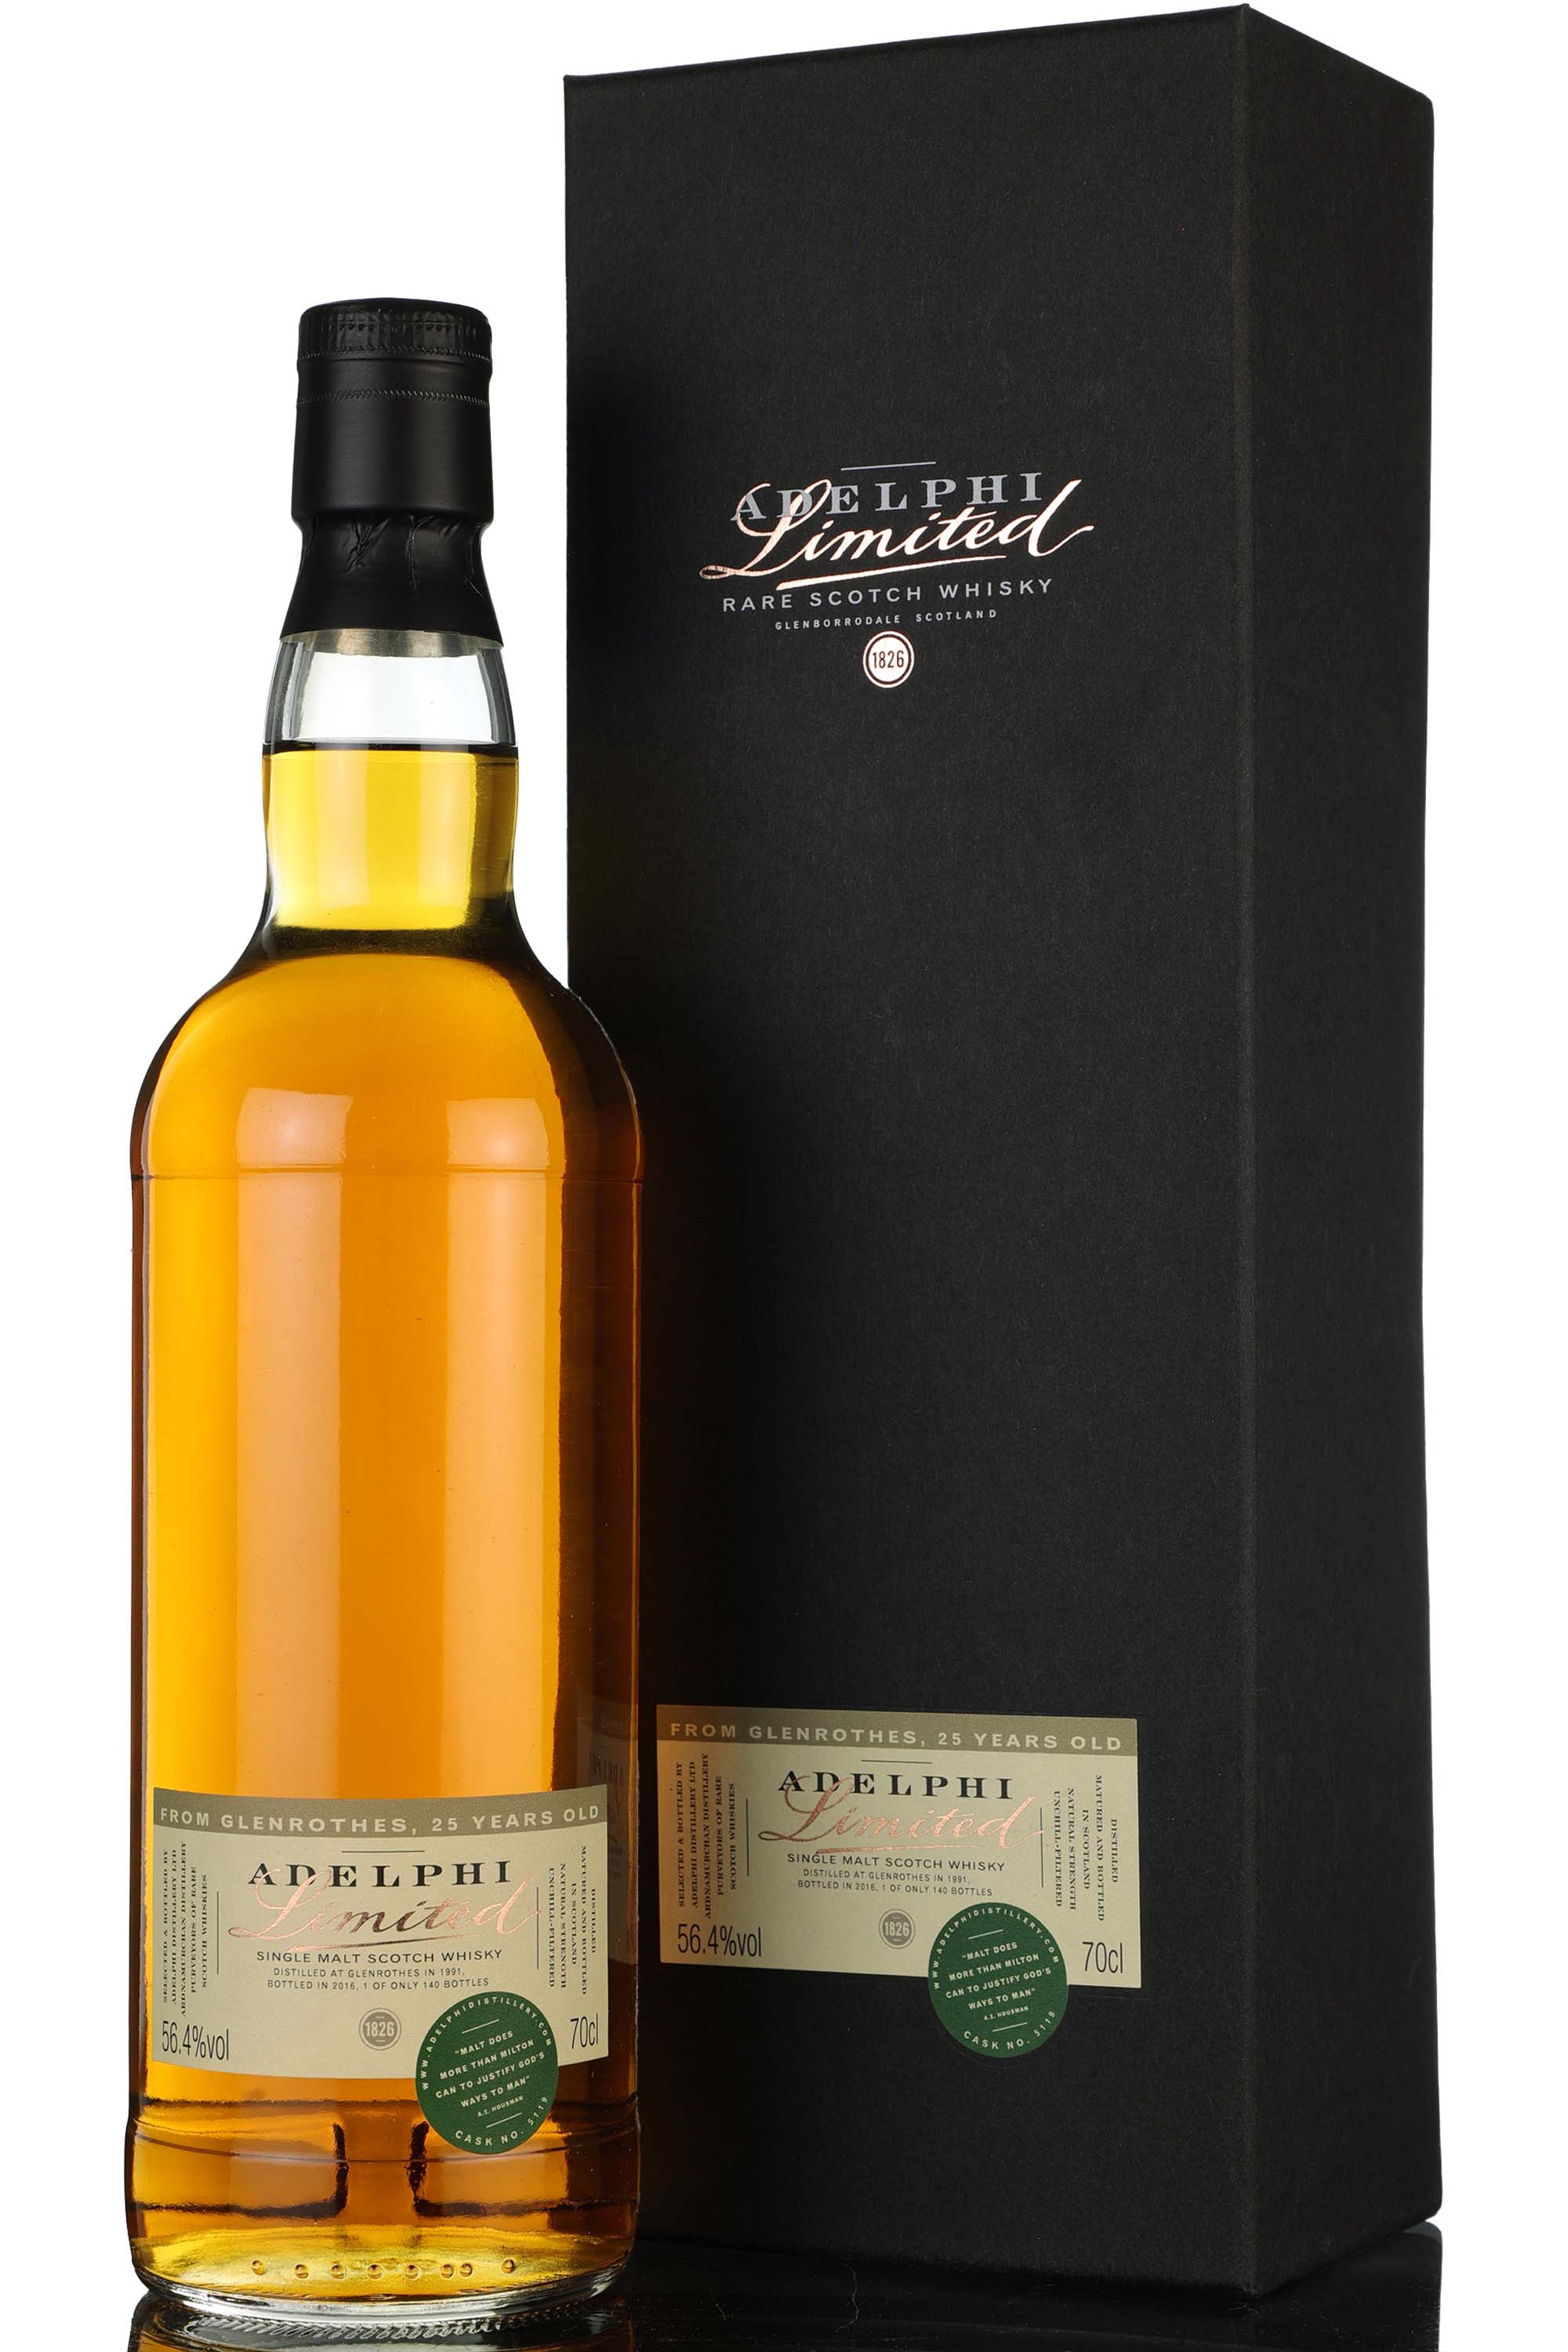 Glenrothes 1991-2016 - 25 Year Old - Adelphi - Single Cask 5119